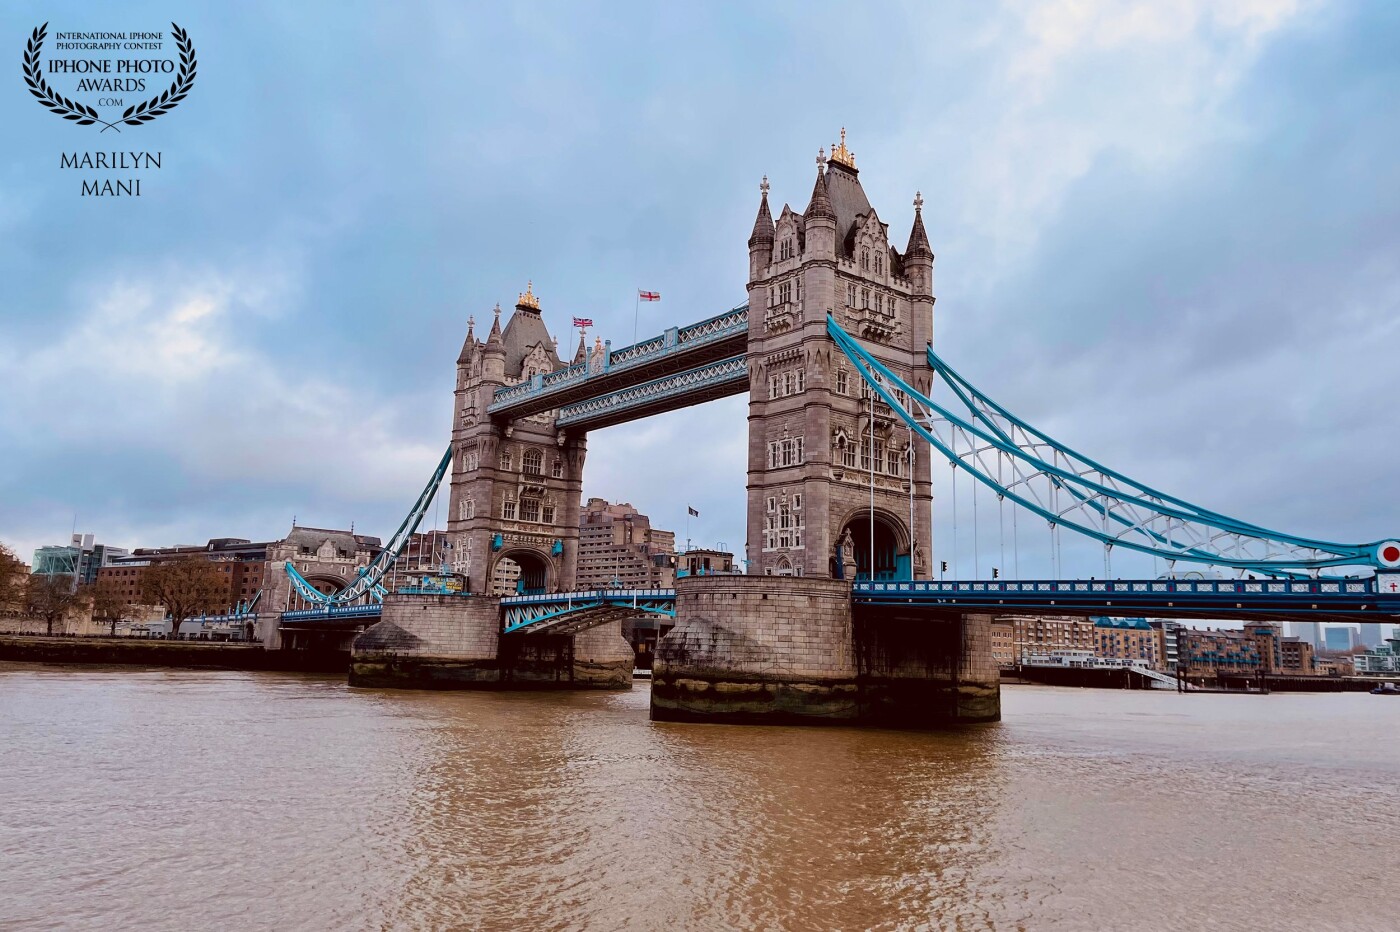 The view that never ceases to amaze! The Tower bridge in London in its majestic glory dazzles the landscape even on a cloudy rainy day !